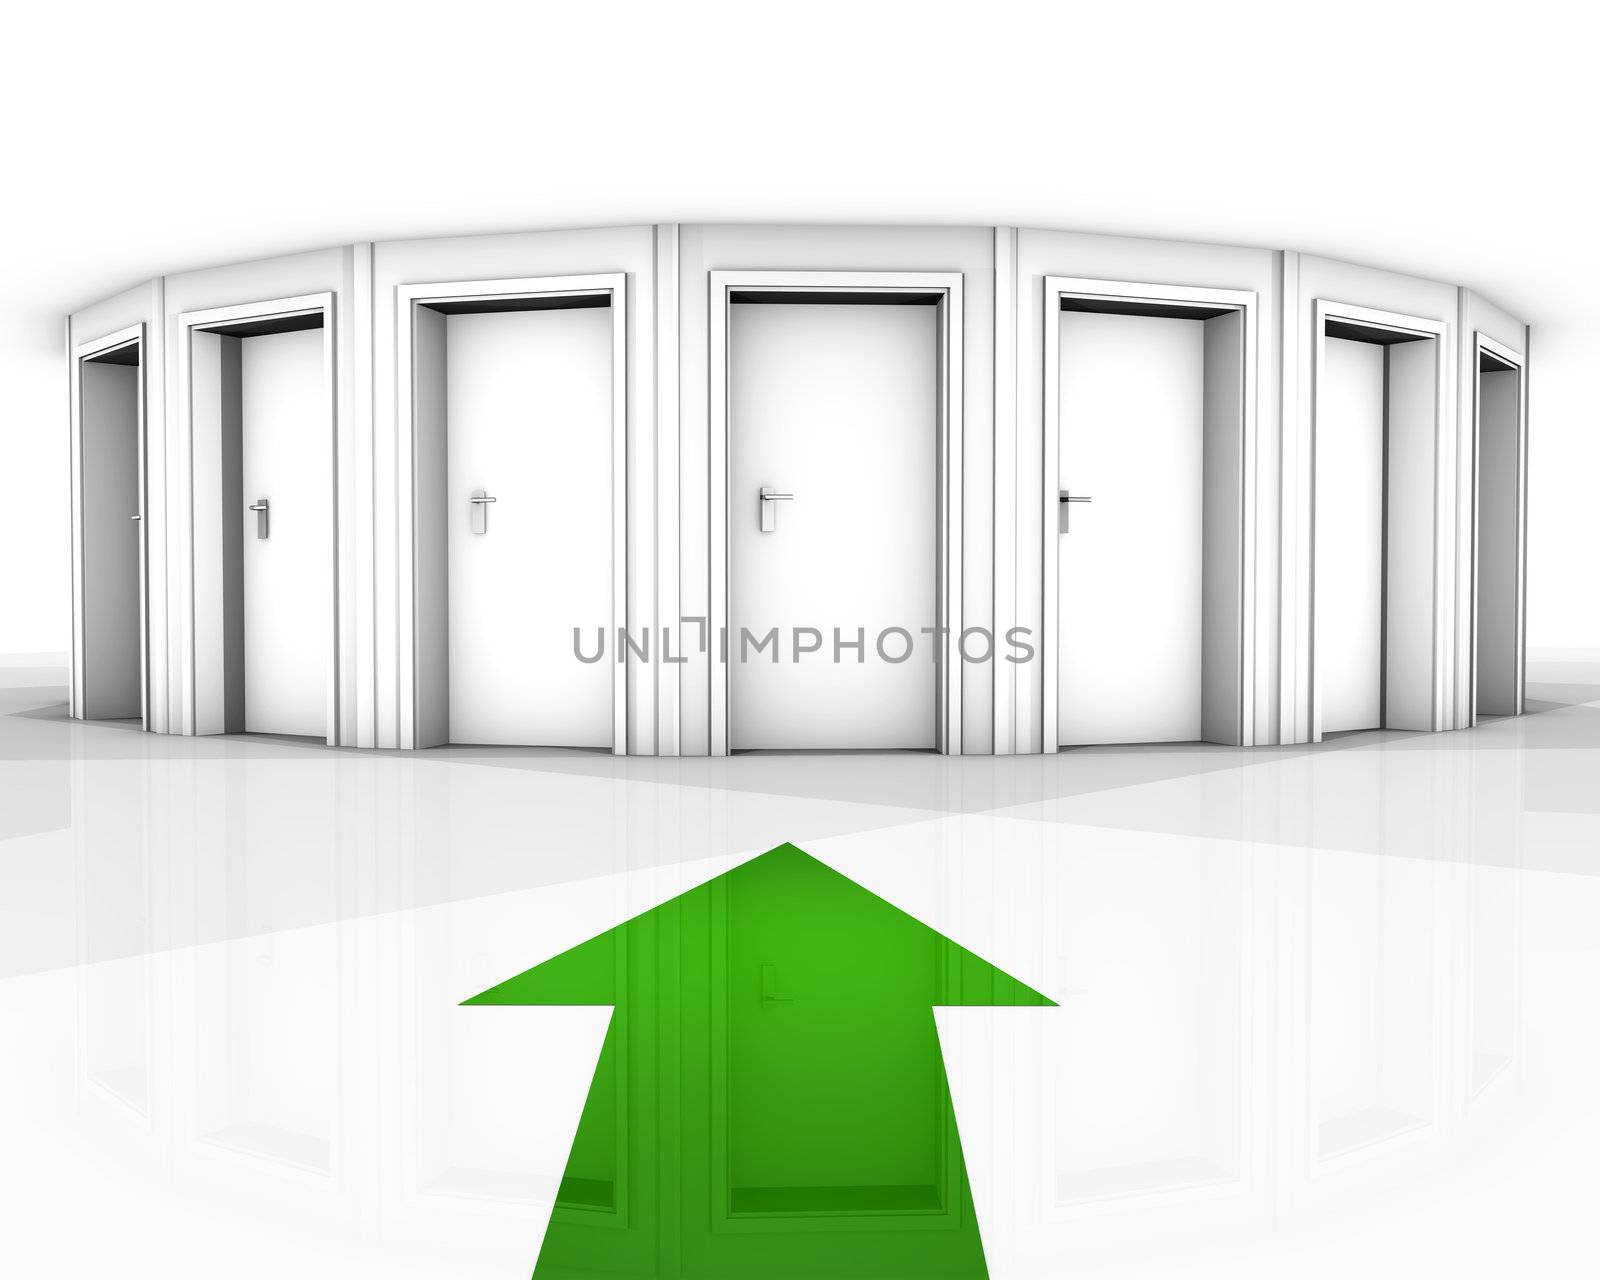 rendering of a white room with closed doors and green arrow